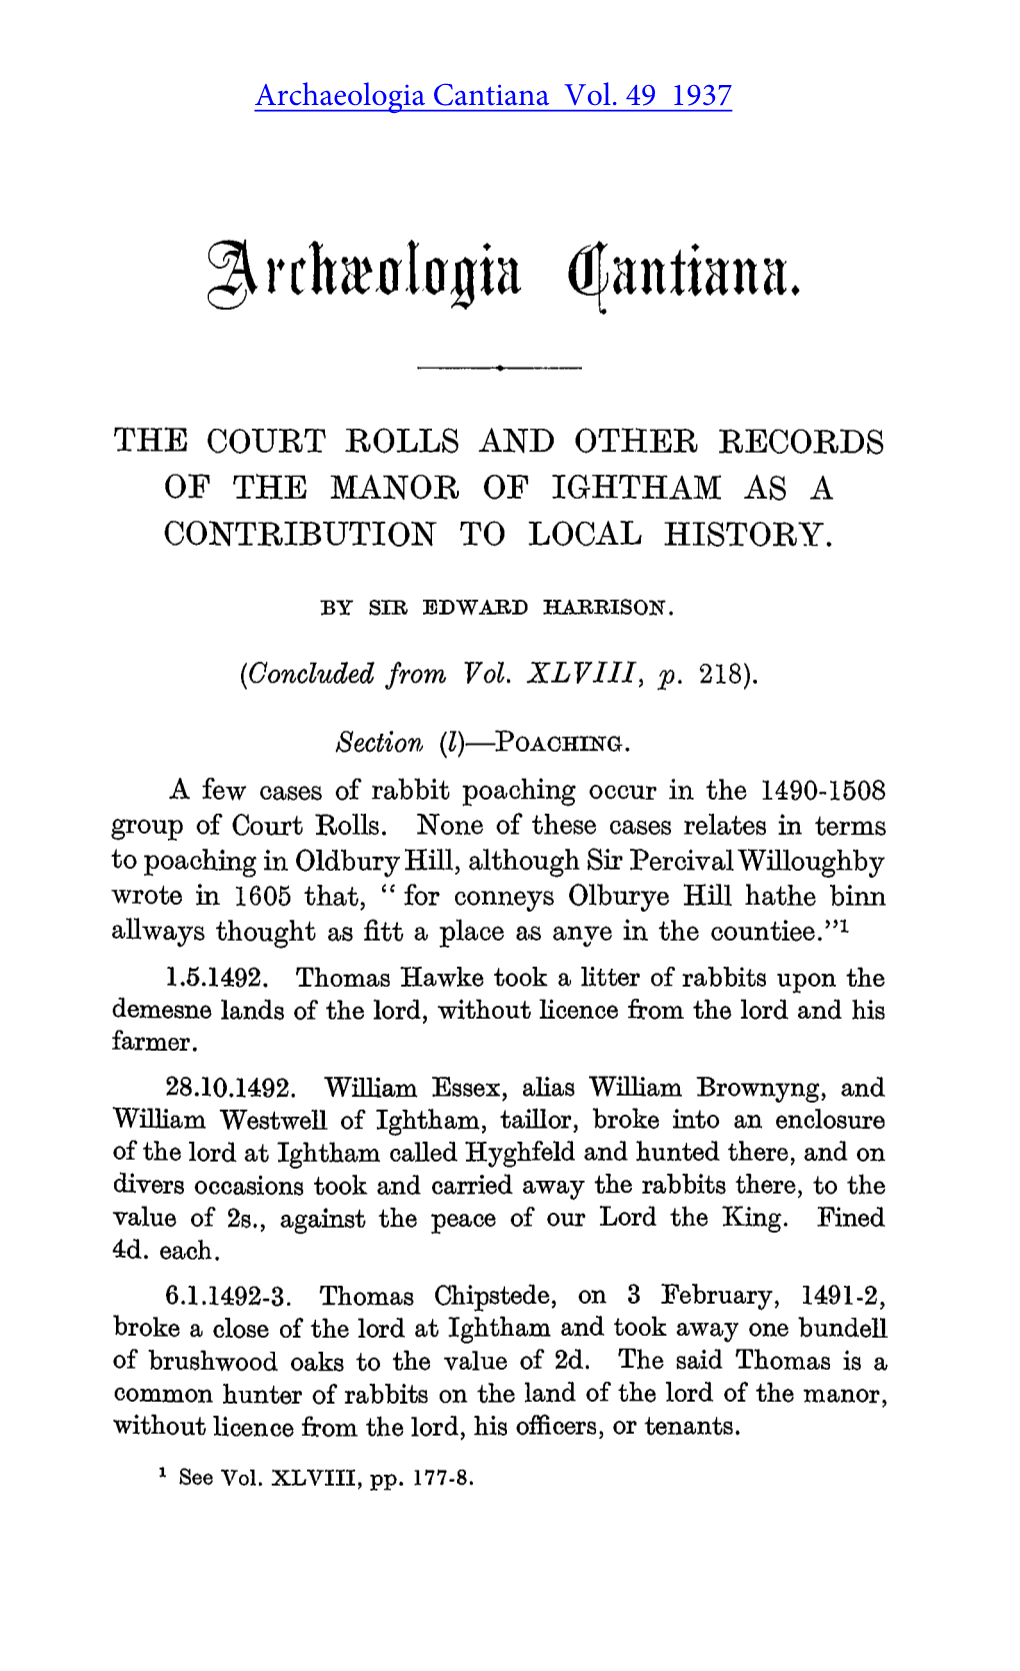 The Court Rolls and Other Records of the Manor of Ightham As a Contribution to Local History